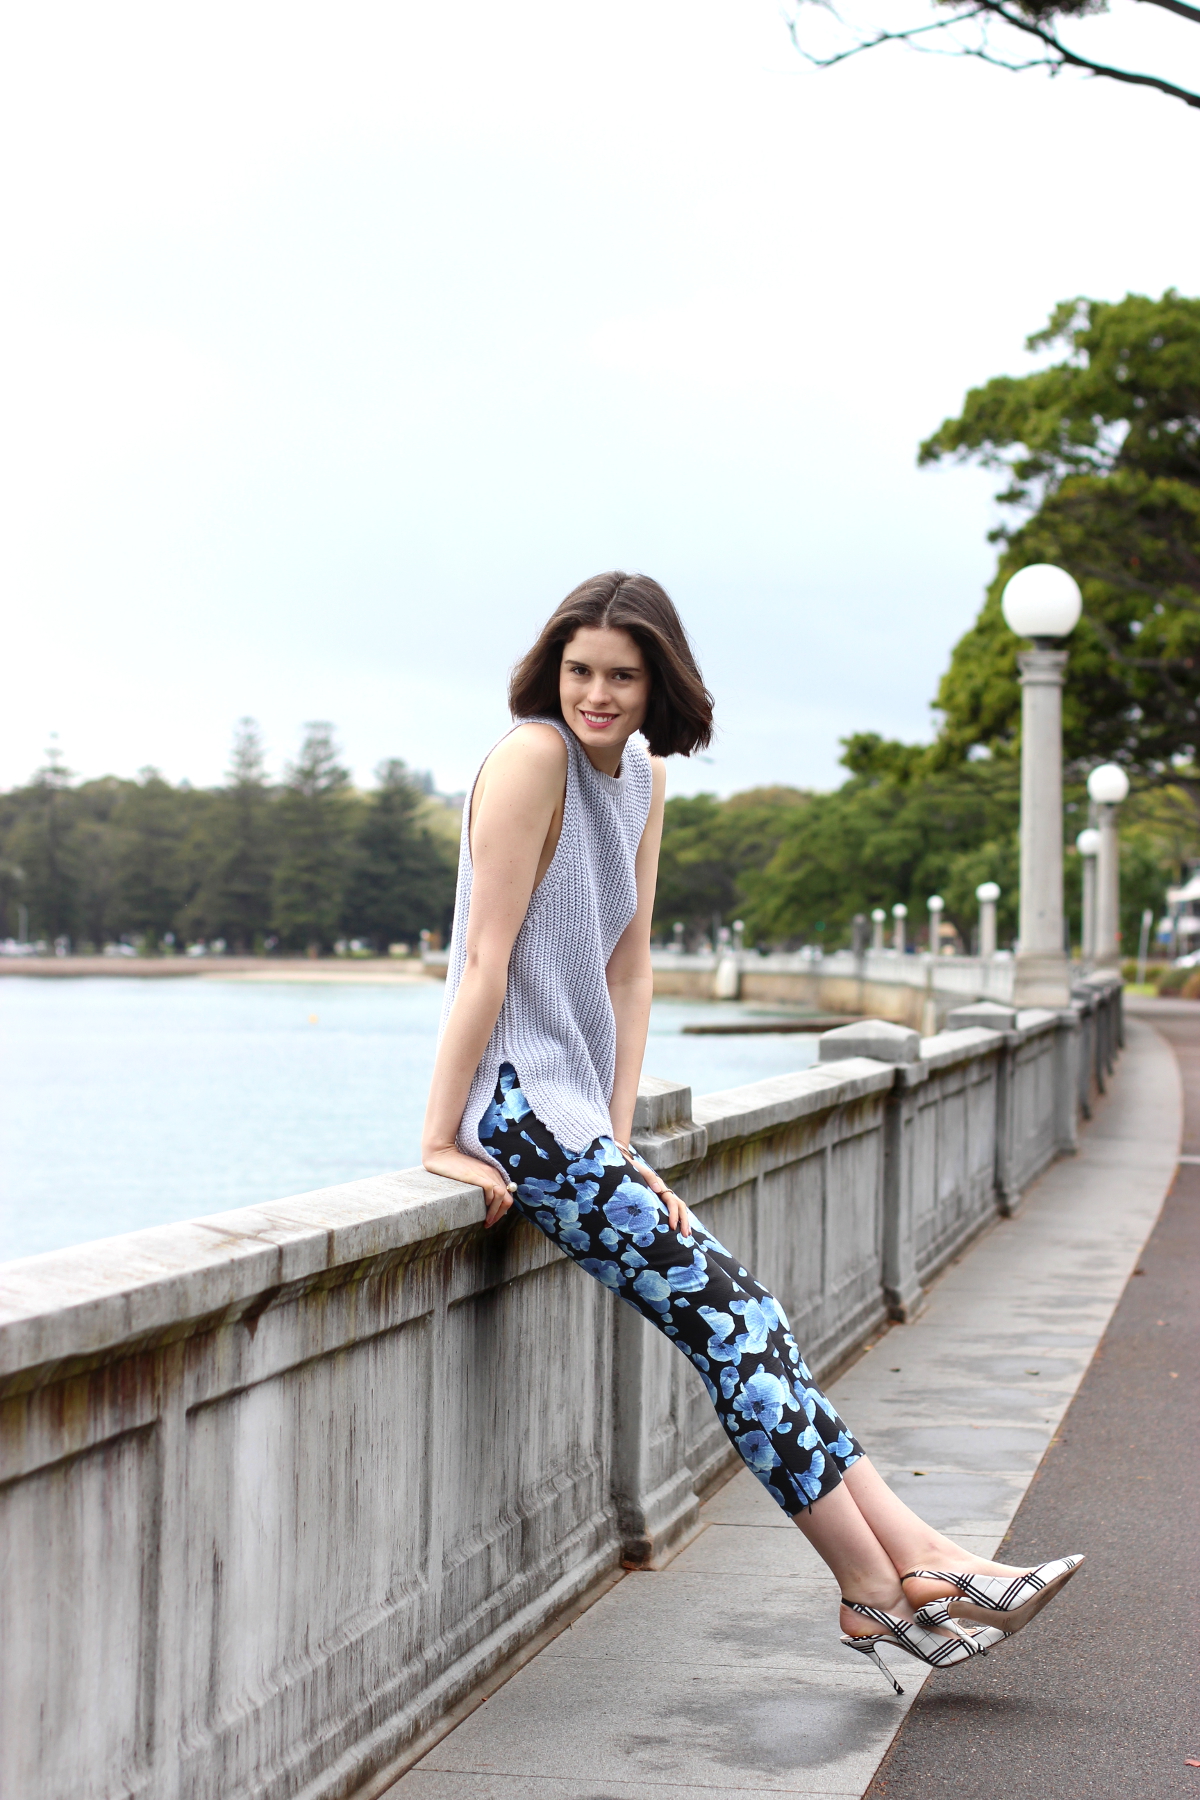 BYCHILL Chloe Hill in Viktoria and Woods grey sleeveless knit top and floral printed pants at Rosebay